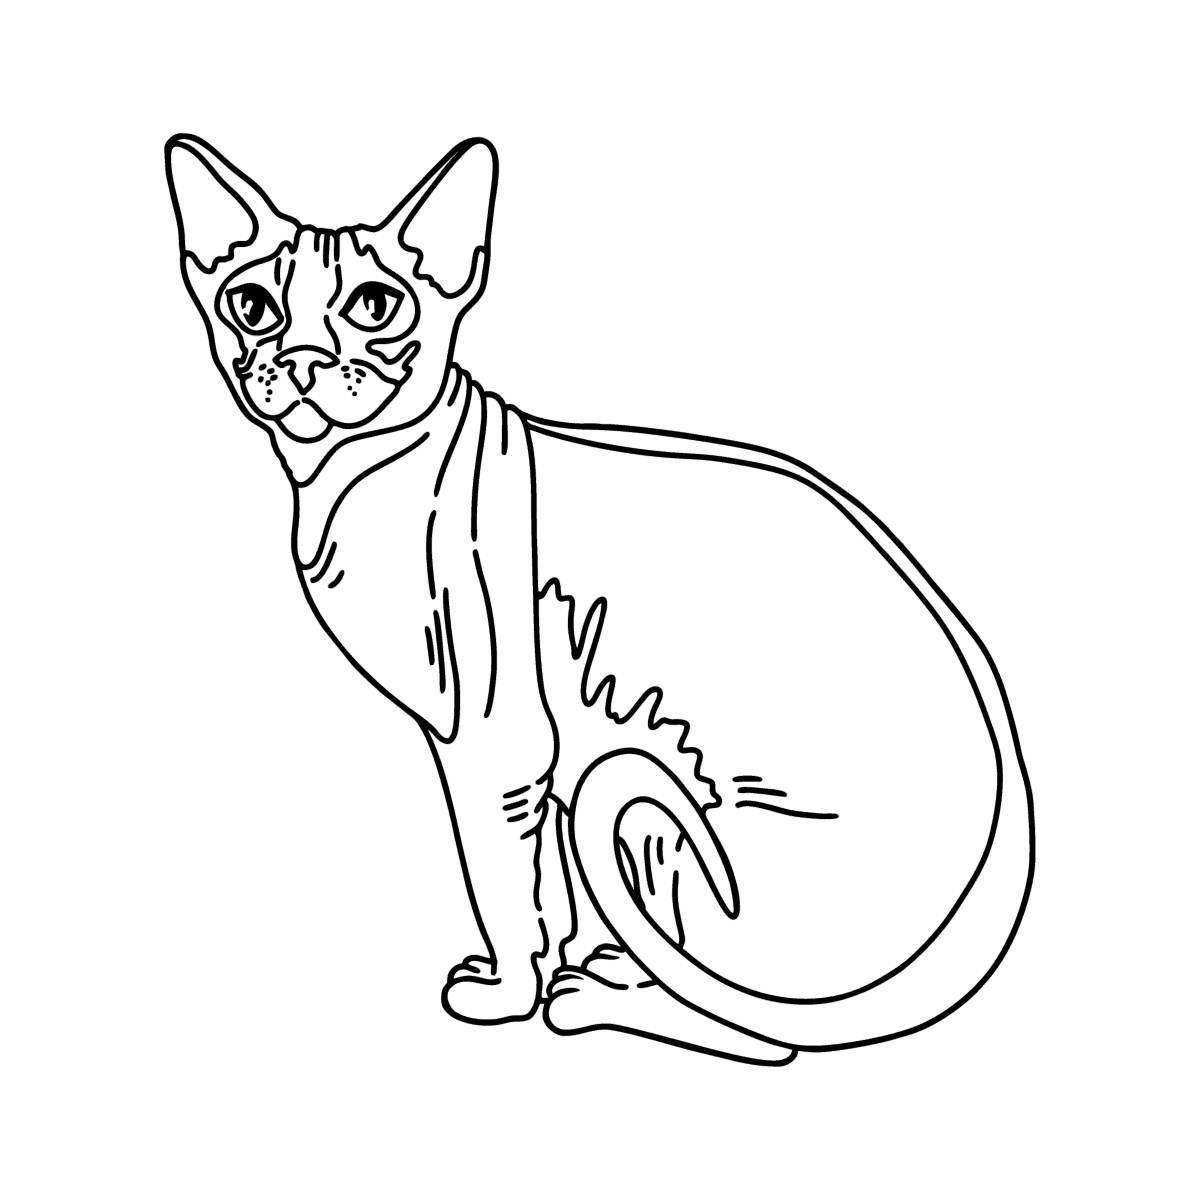 Colorful sphinx cat coloring page